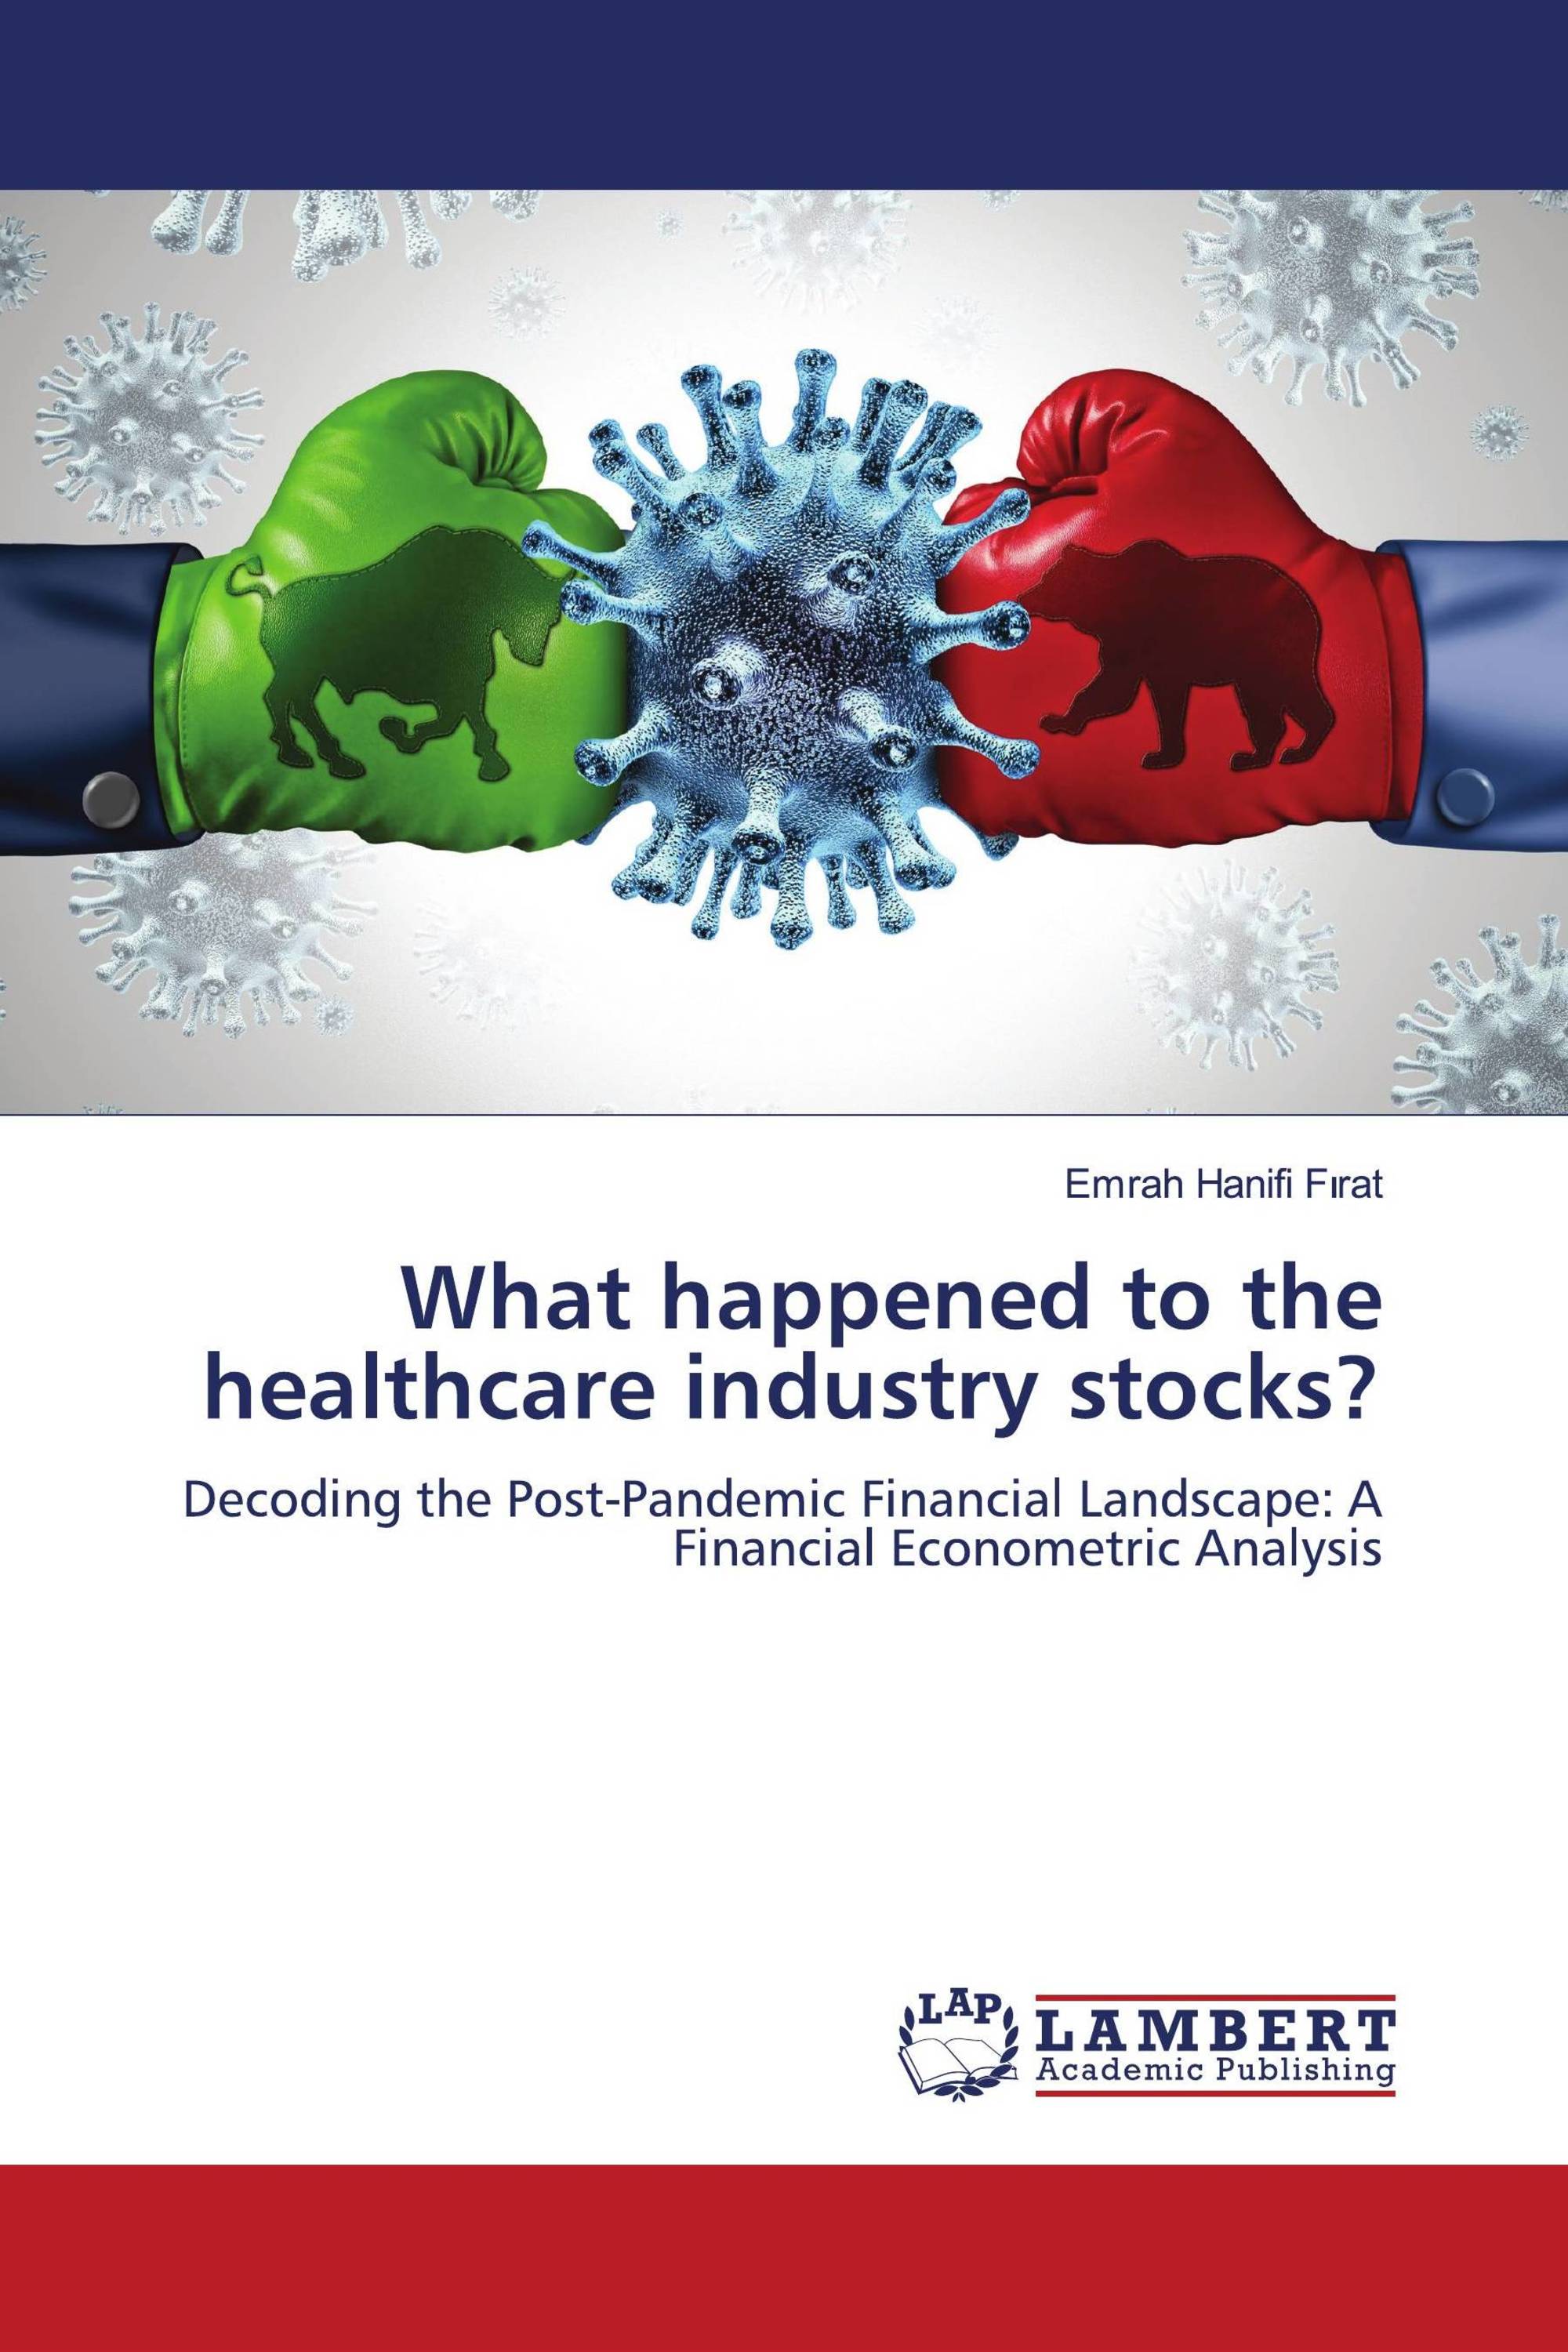 What happened to the healthcare industry stocks?